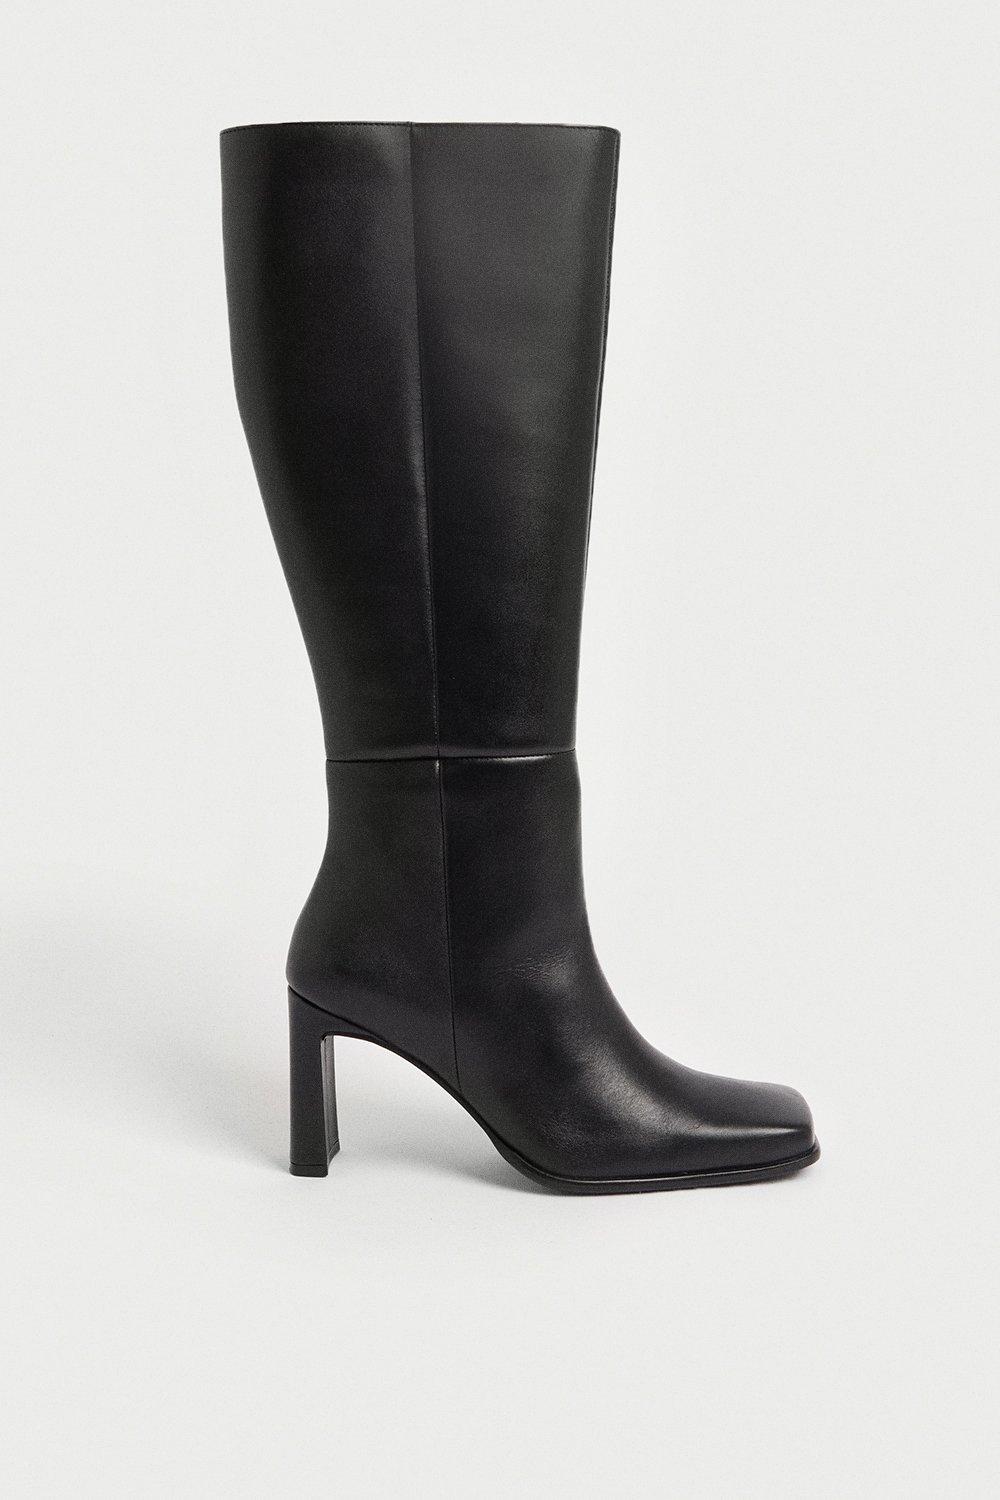 Boots | Premium Leather Squared Toe Knee High Boots | Warehouse